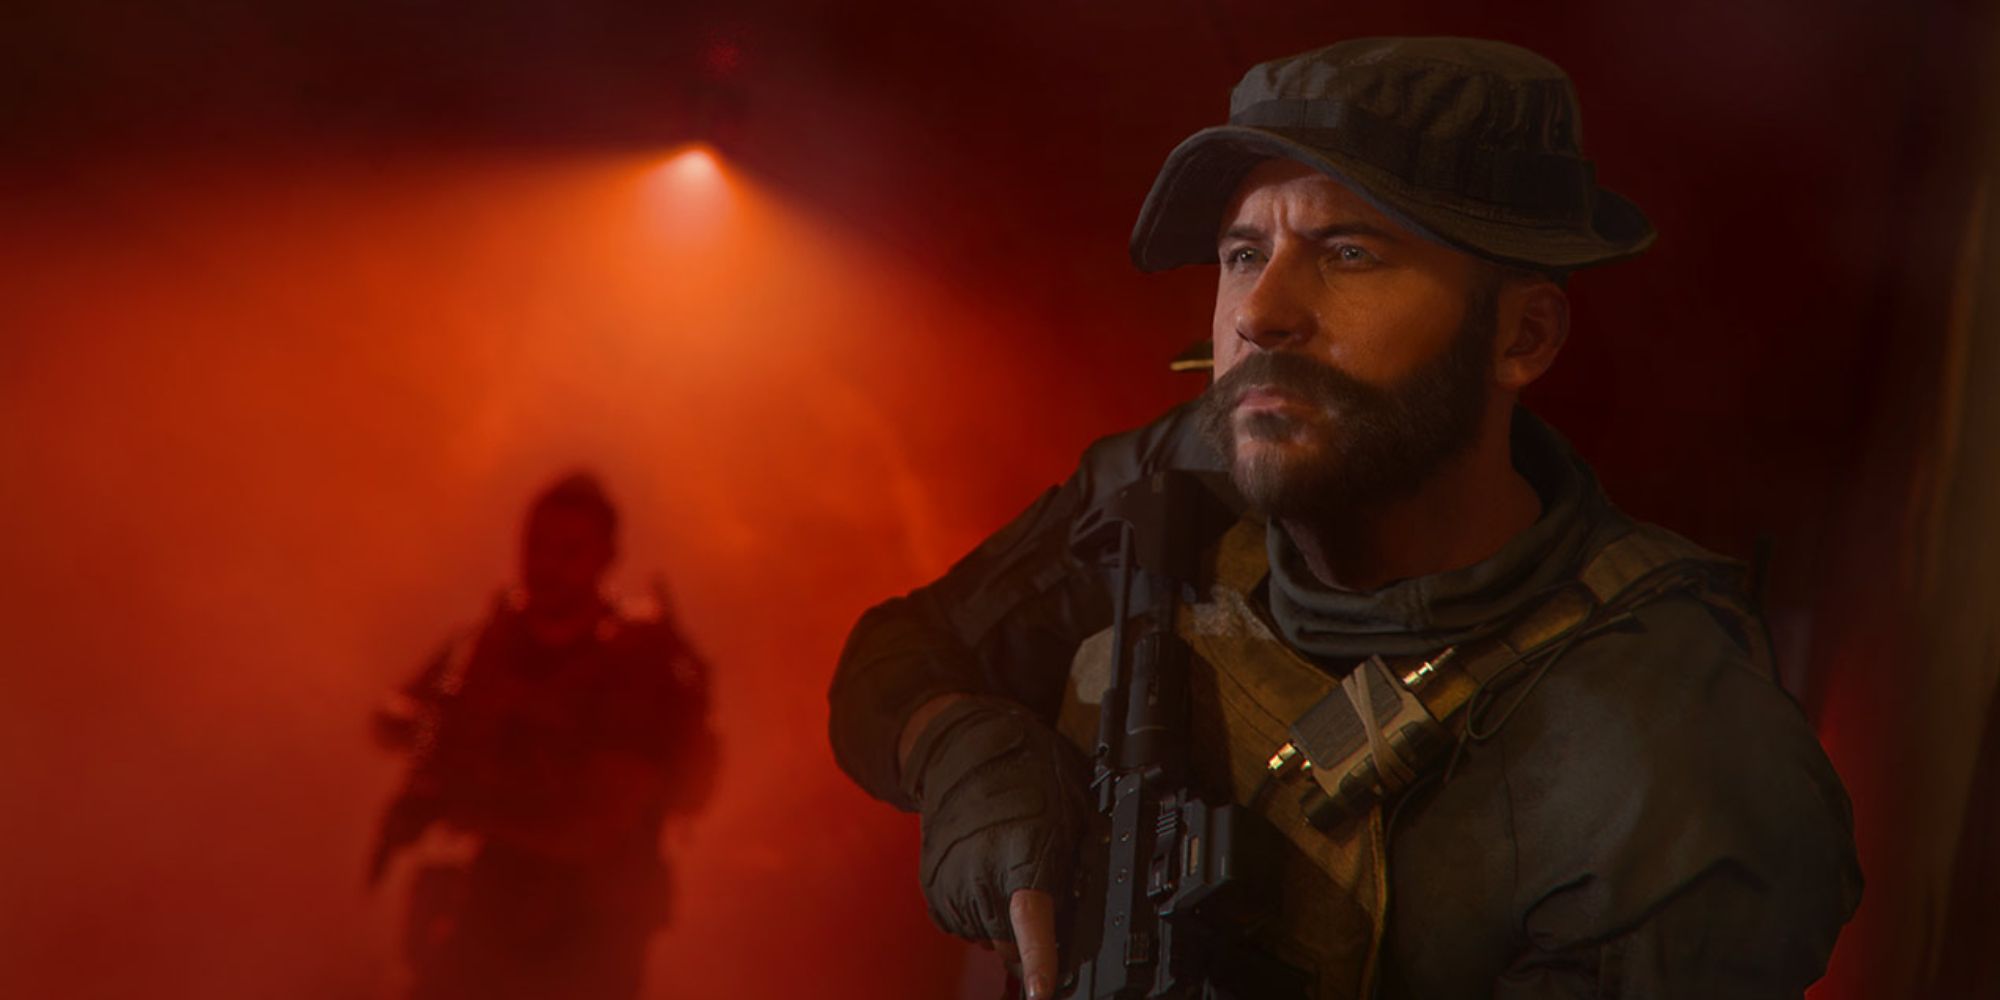 Captain Price and Soap from Modern Warfare 3 standing in a red corridor